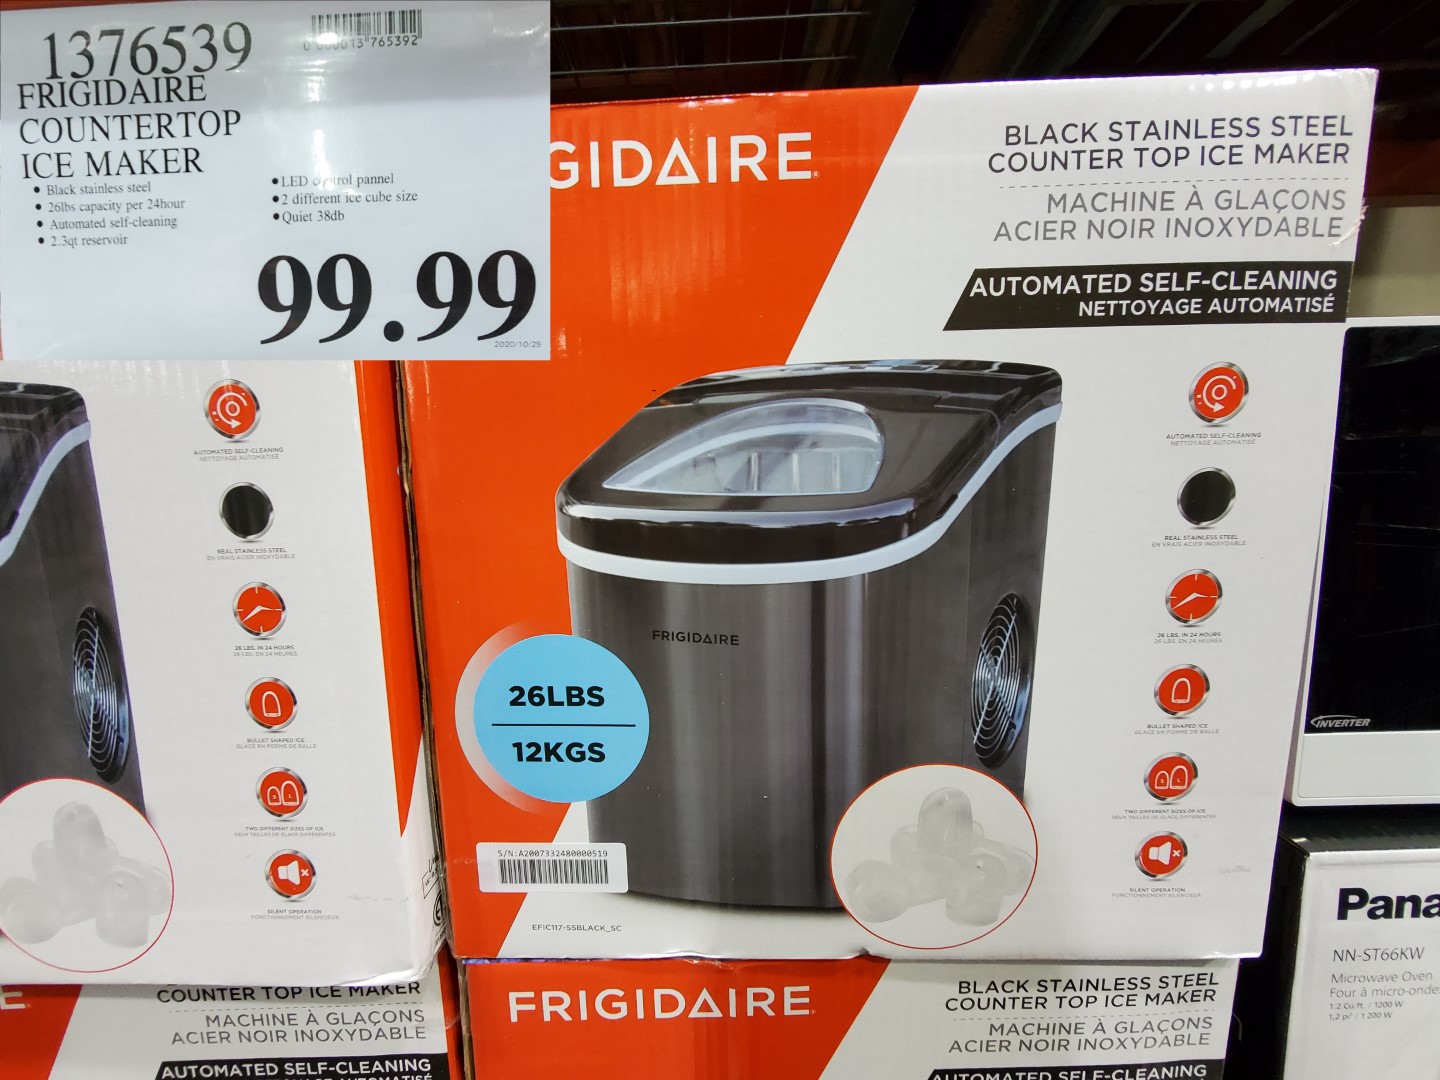 Costco Is Selling the Frigidaire Countertop Ice Maker - Parade